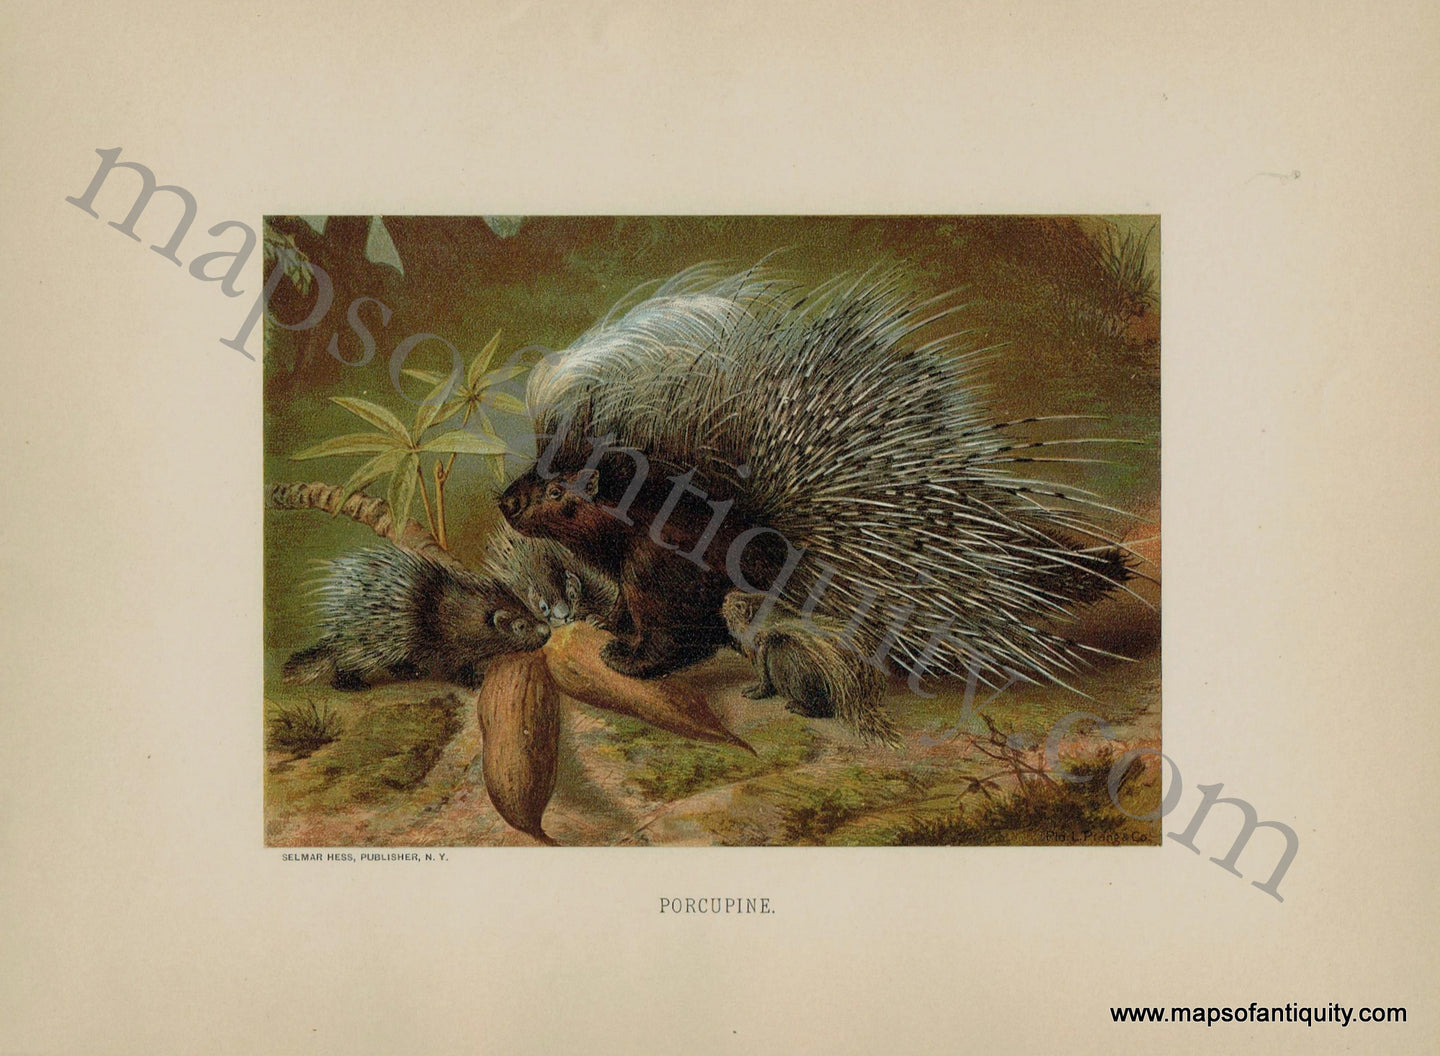 Antique-Print-Prints-Illustration-Illustrated-Lithographs-Porcupine-Porcupines-Selmar-Hess-Louis-Prang-Printed-Color-Chromolithograph-Chromolithographs-Lithograph-Natural-History-Animals-1880s-1800s-Late-19th-Century-Maps-of-Antiquity